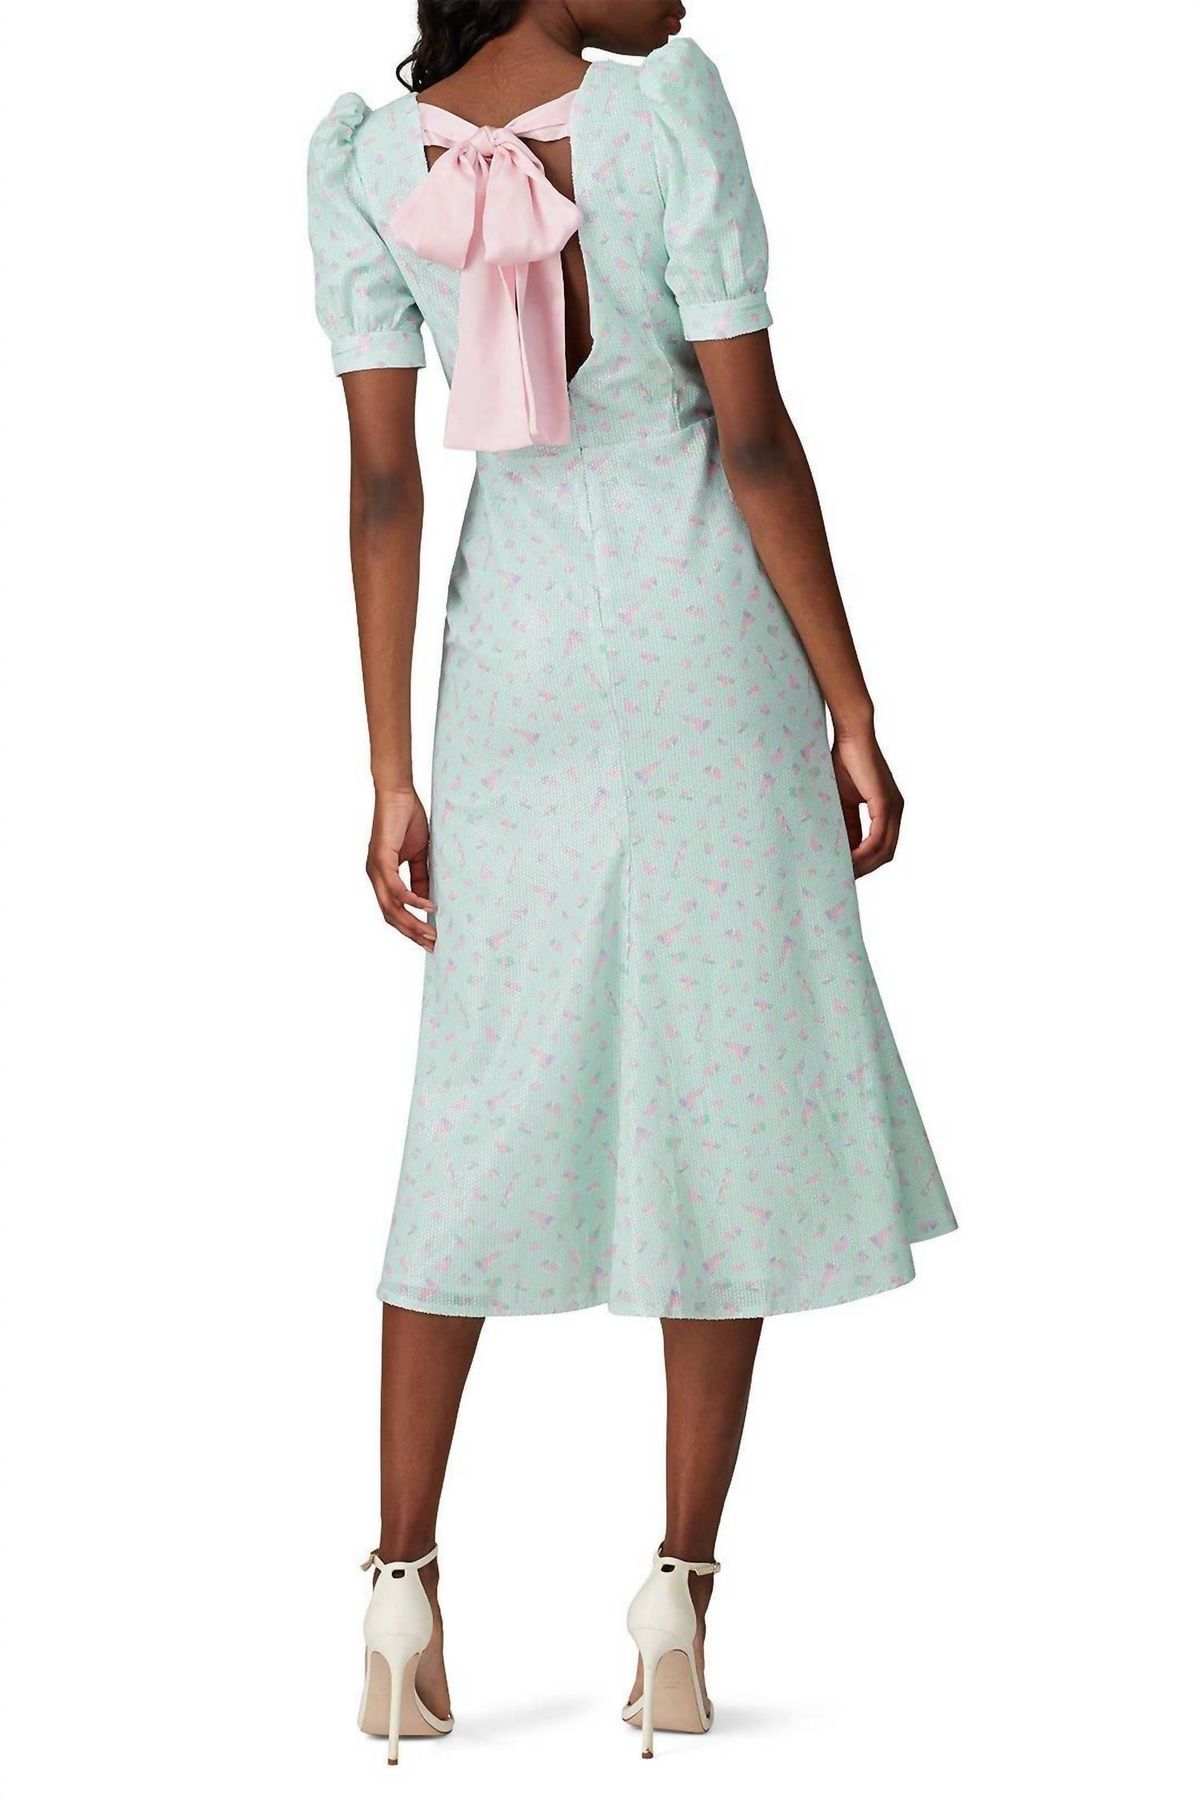 Style 1-1819459701-4818-1 Olivia Rubin Size 4 Light Green Cocktail Dress on Queenly